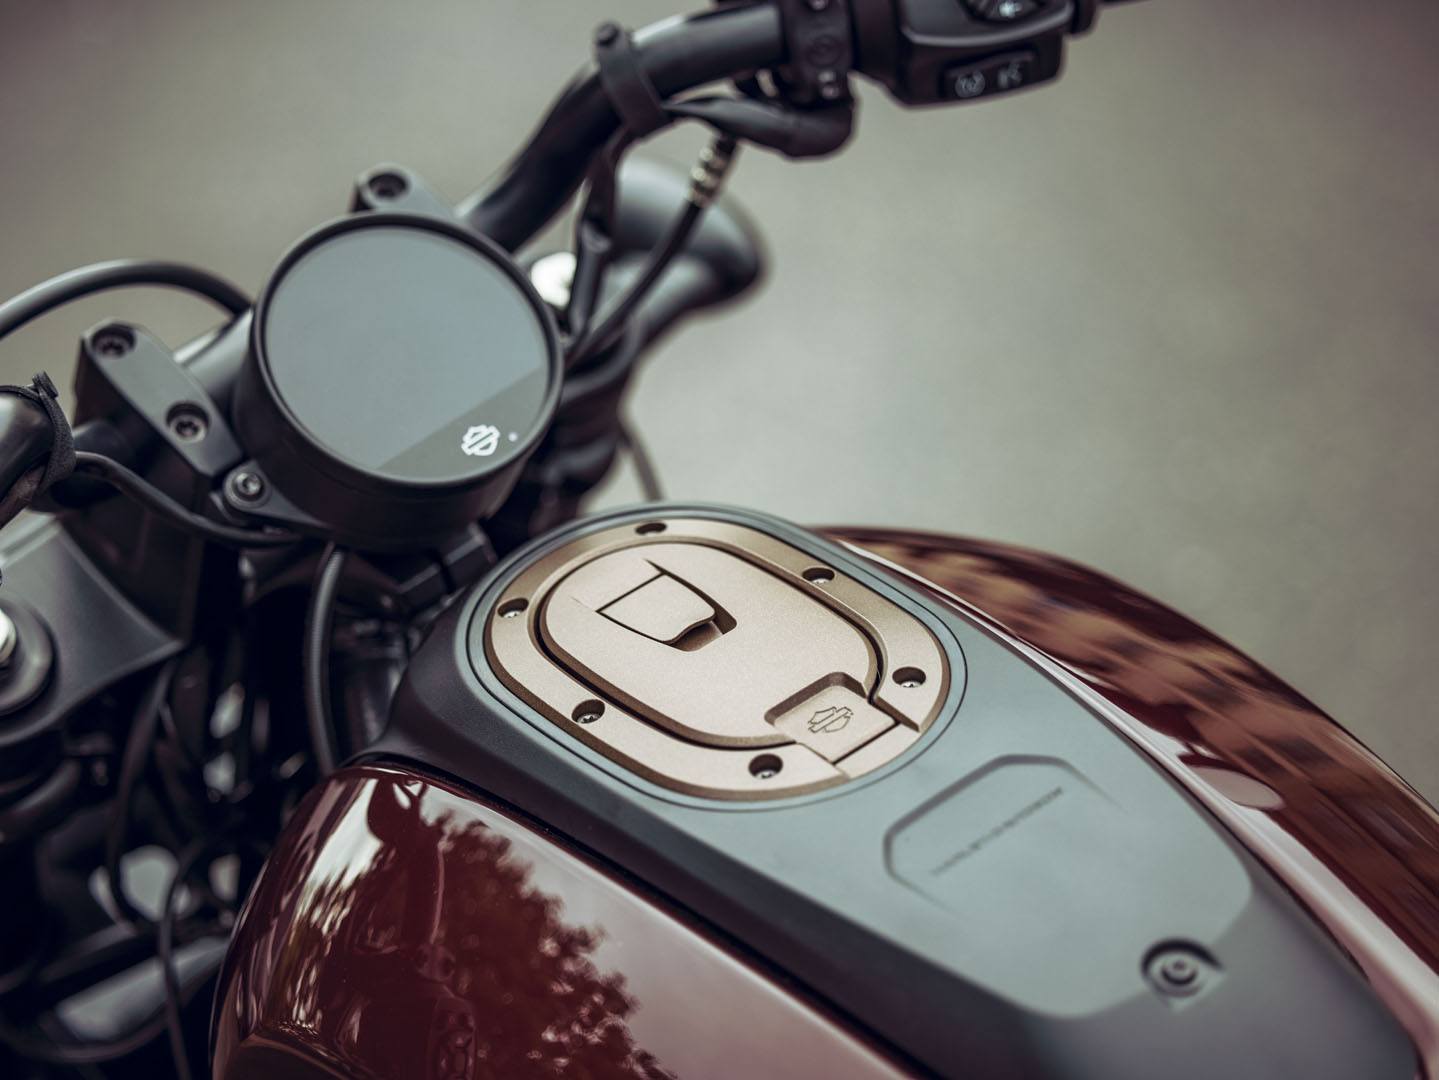 2021 Harley-Davidson Sportster® S in Temple, Texas - Photo 6